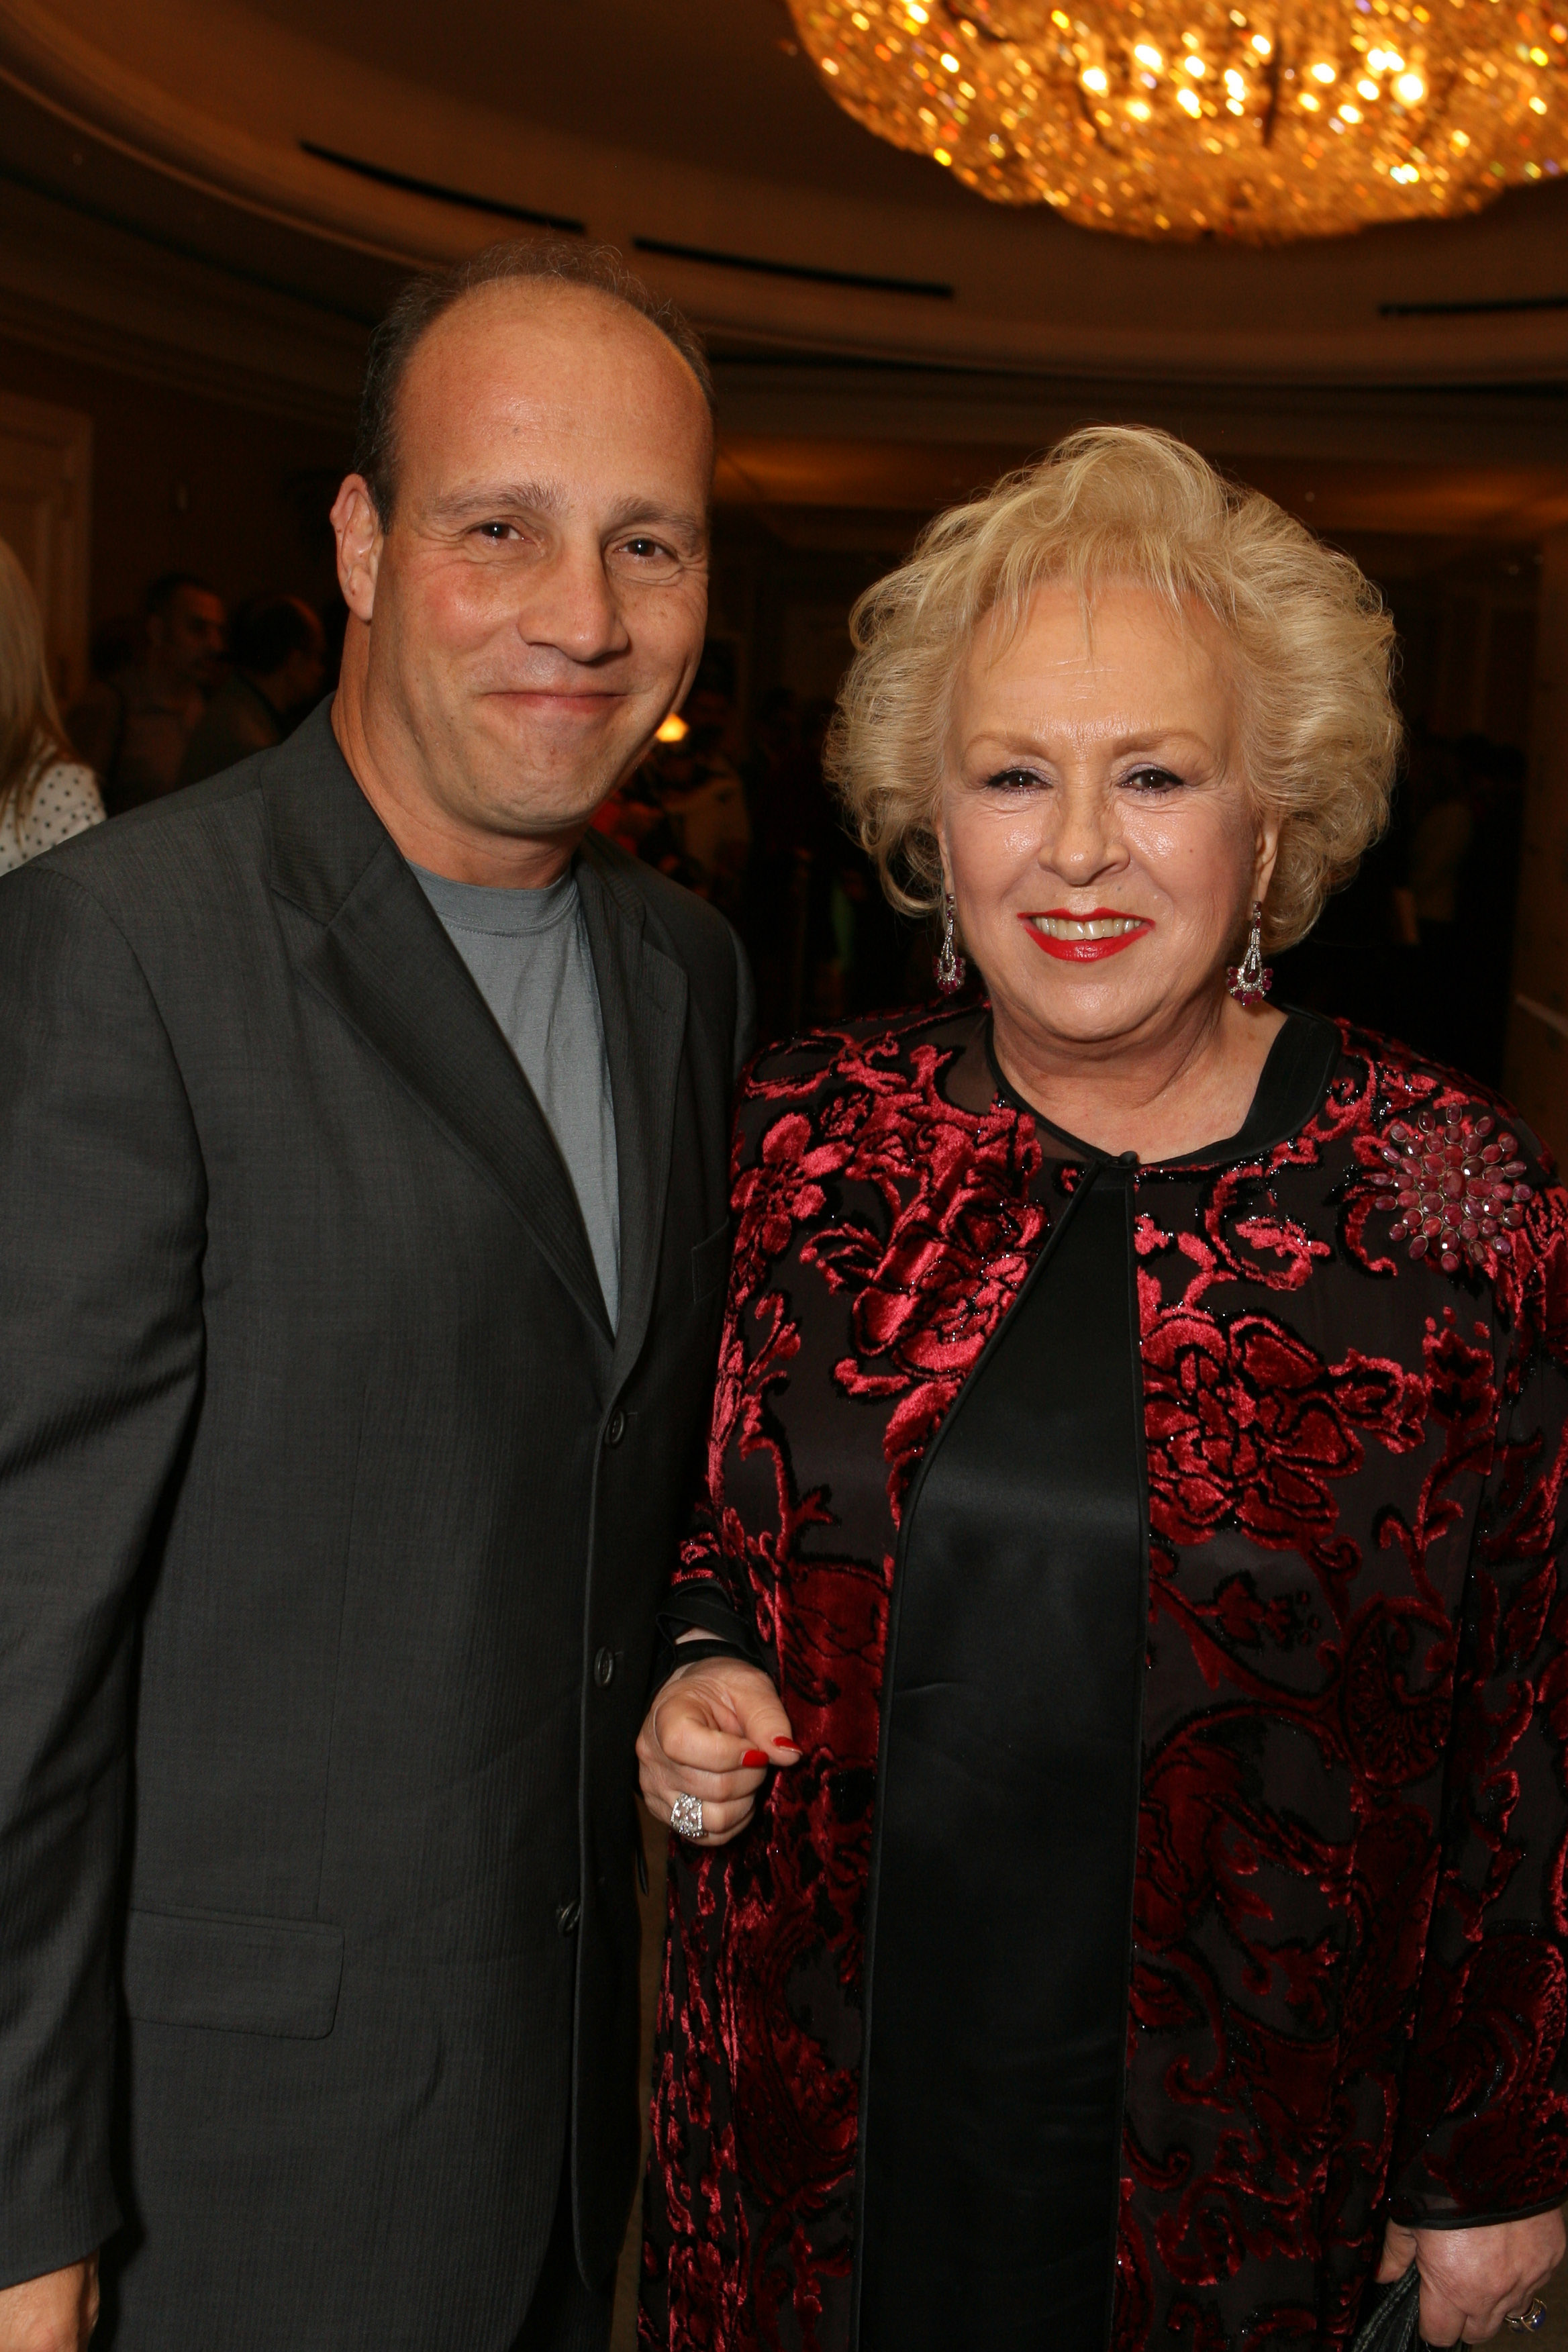 Michael Cannata and Doris Roberts during Peace Over Violence's 35th Annual Humanitarian Awards Dinner in Beverly Hills, California, on October 28, 2006 | Source: Getty Images